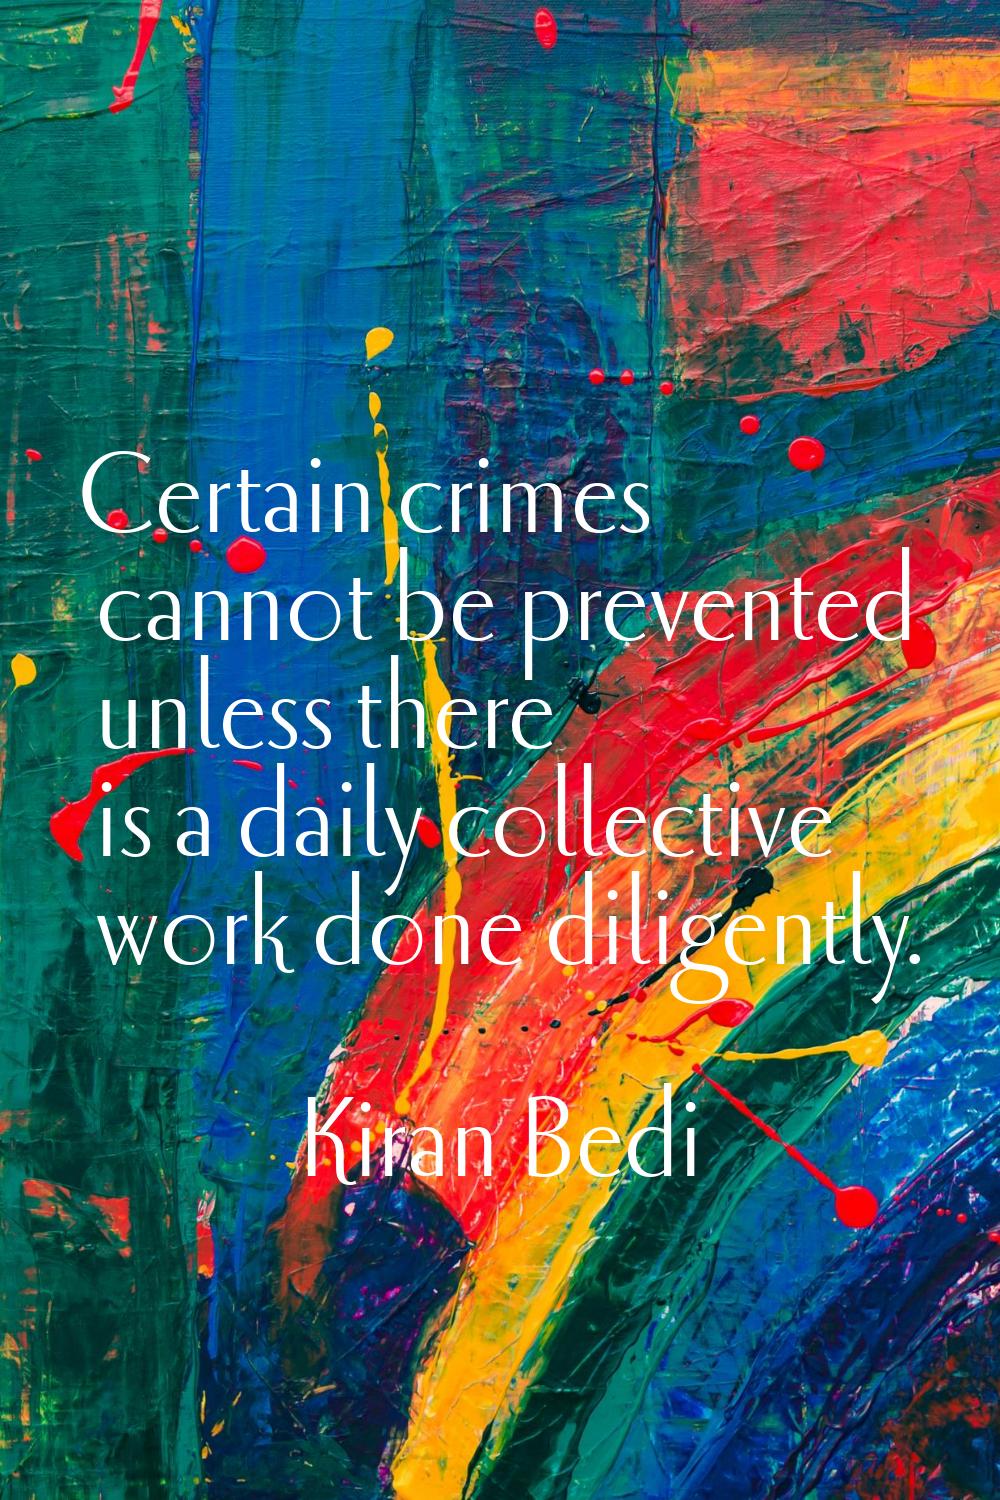 Certain crimes cannot be prevented unless there is a daily collective work done diligently.